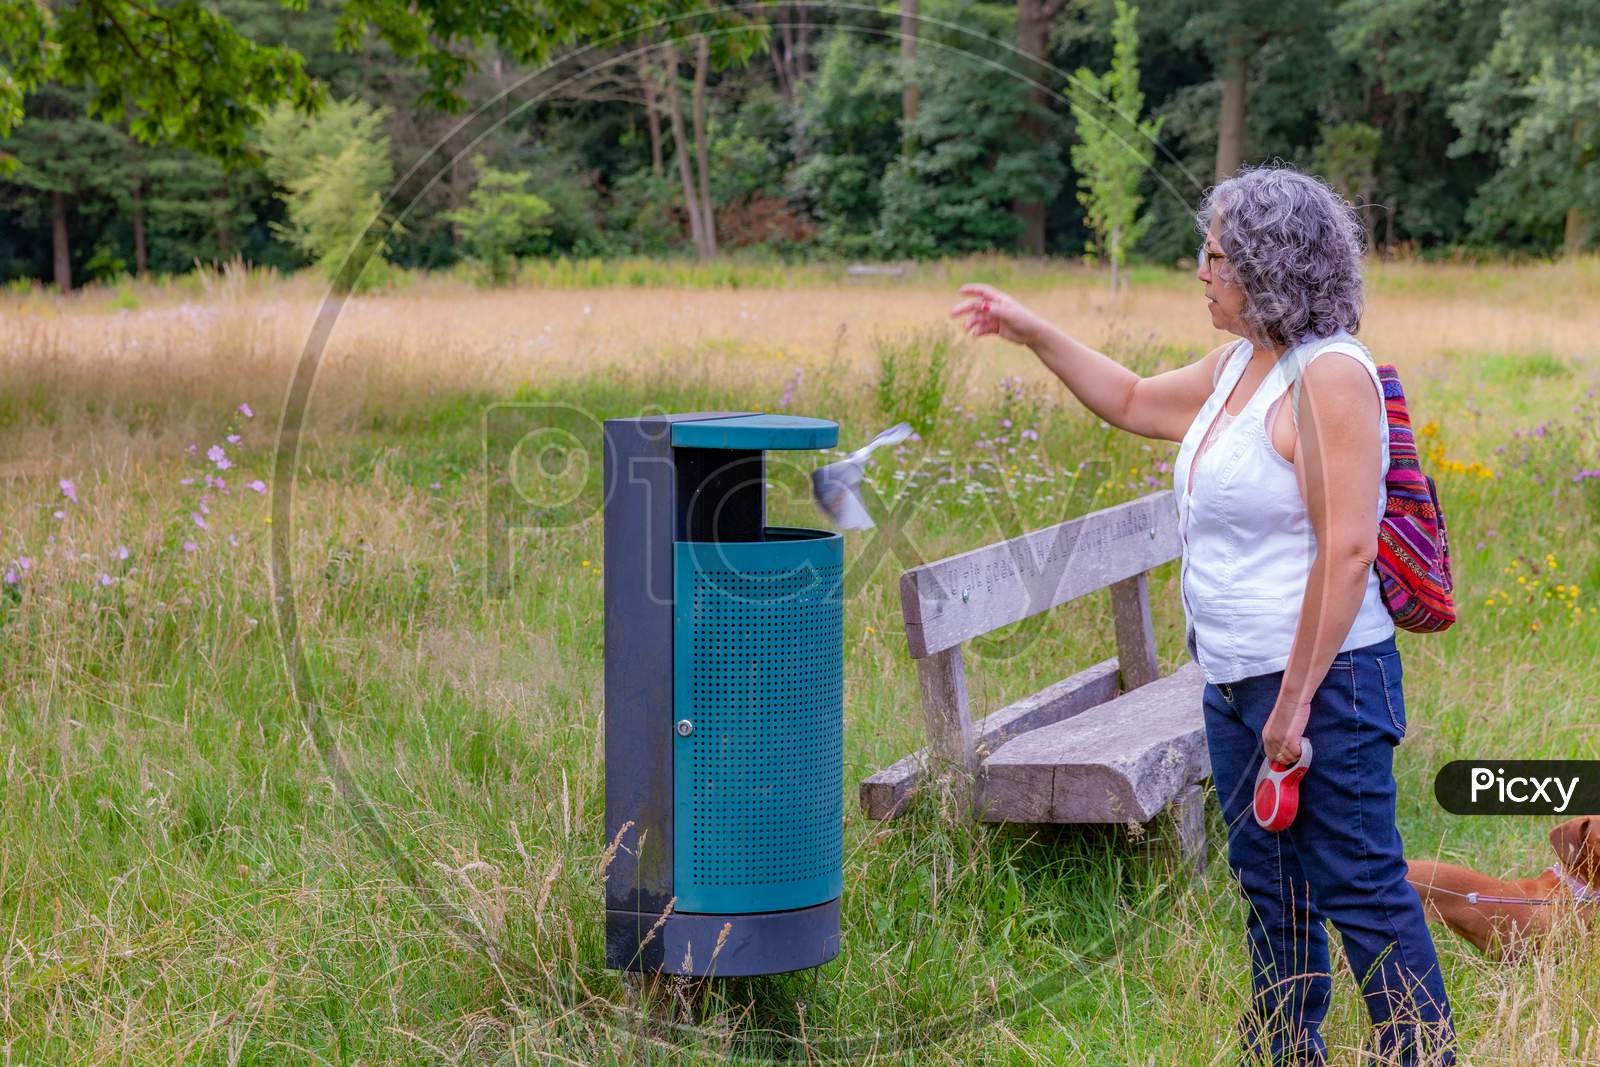 Mature Woman Depositing Her Dog'S Waste In A Public Garbage Can Next To A Wooden Bench In A Park Surrounded By Trees, Responsibility For Environmental Conservation, South Limburg, The Netherlands